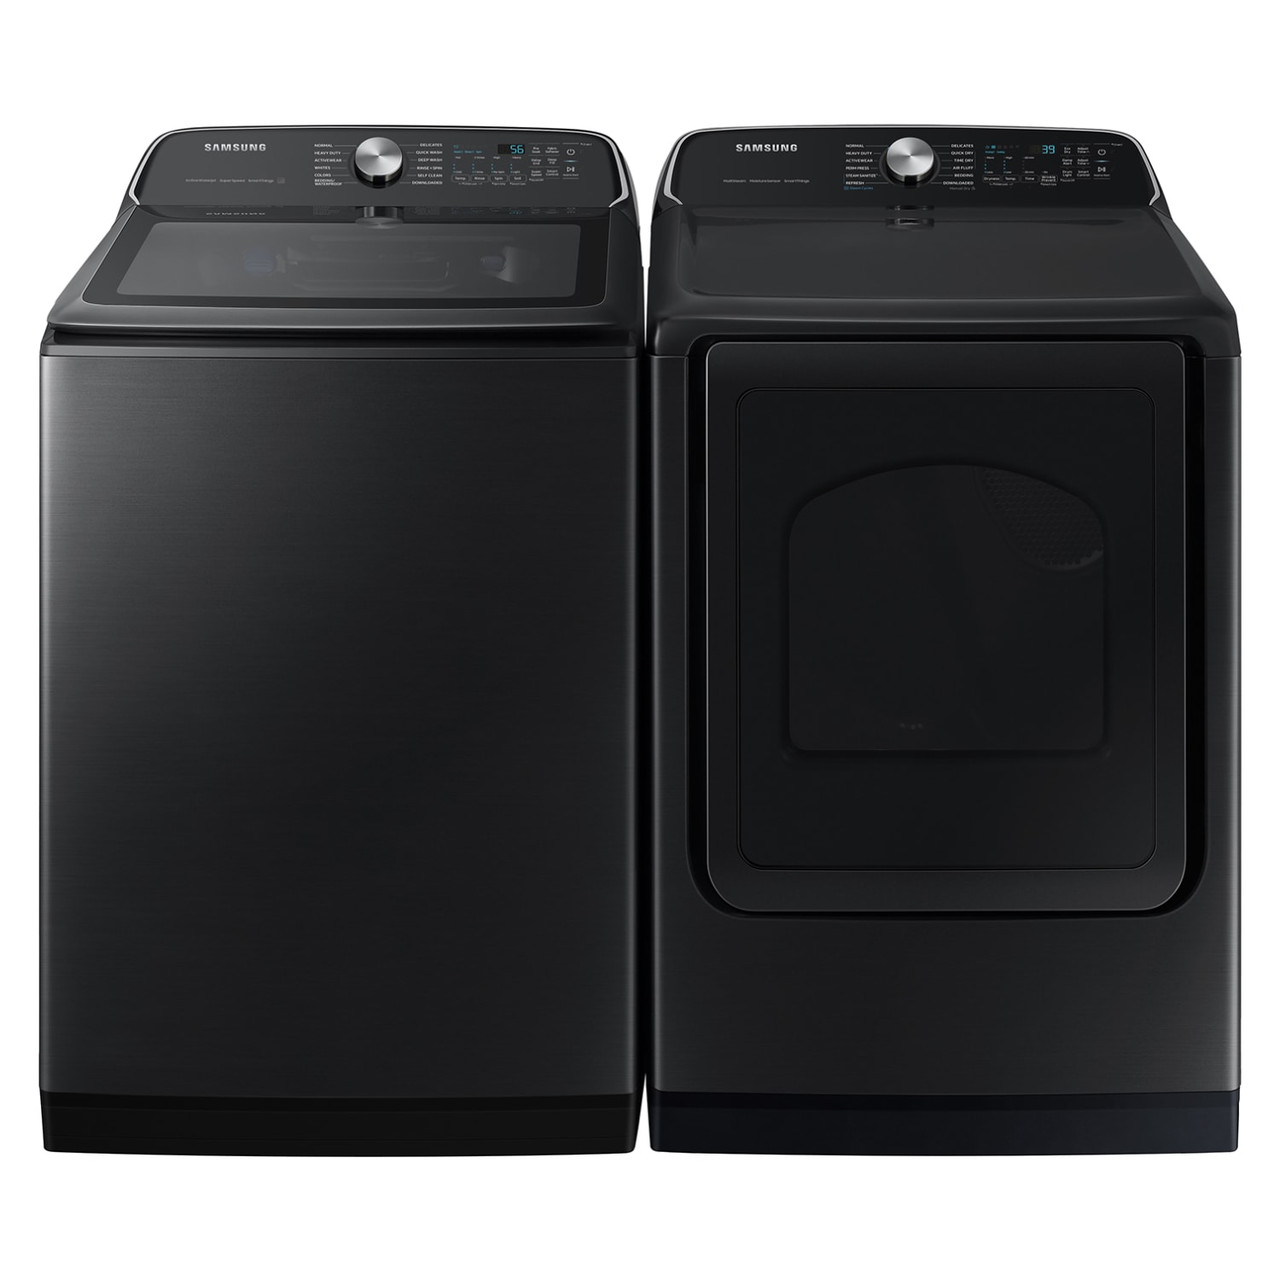 Samsung 5.5 cu. ft. Extra-Large Capacity Smart Top Load Washer with Super Speed Wash - WA55CG7100AV